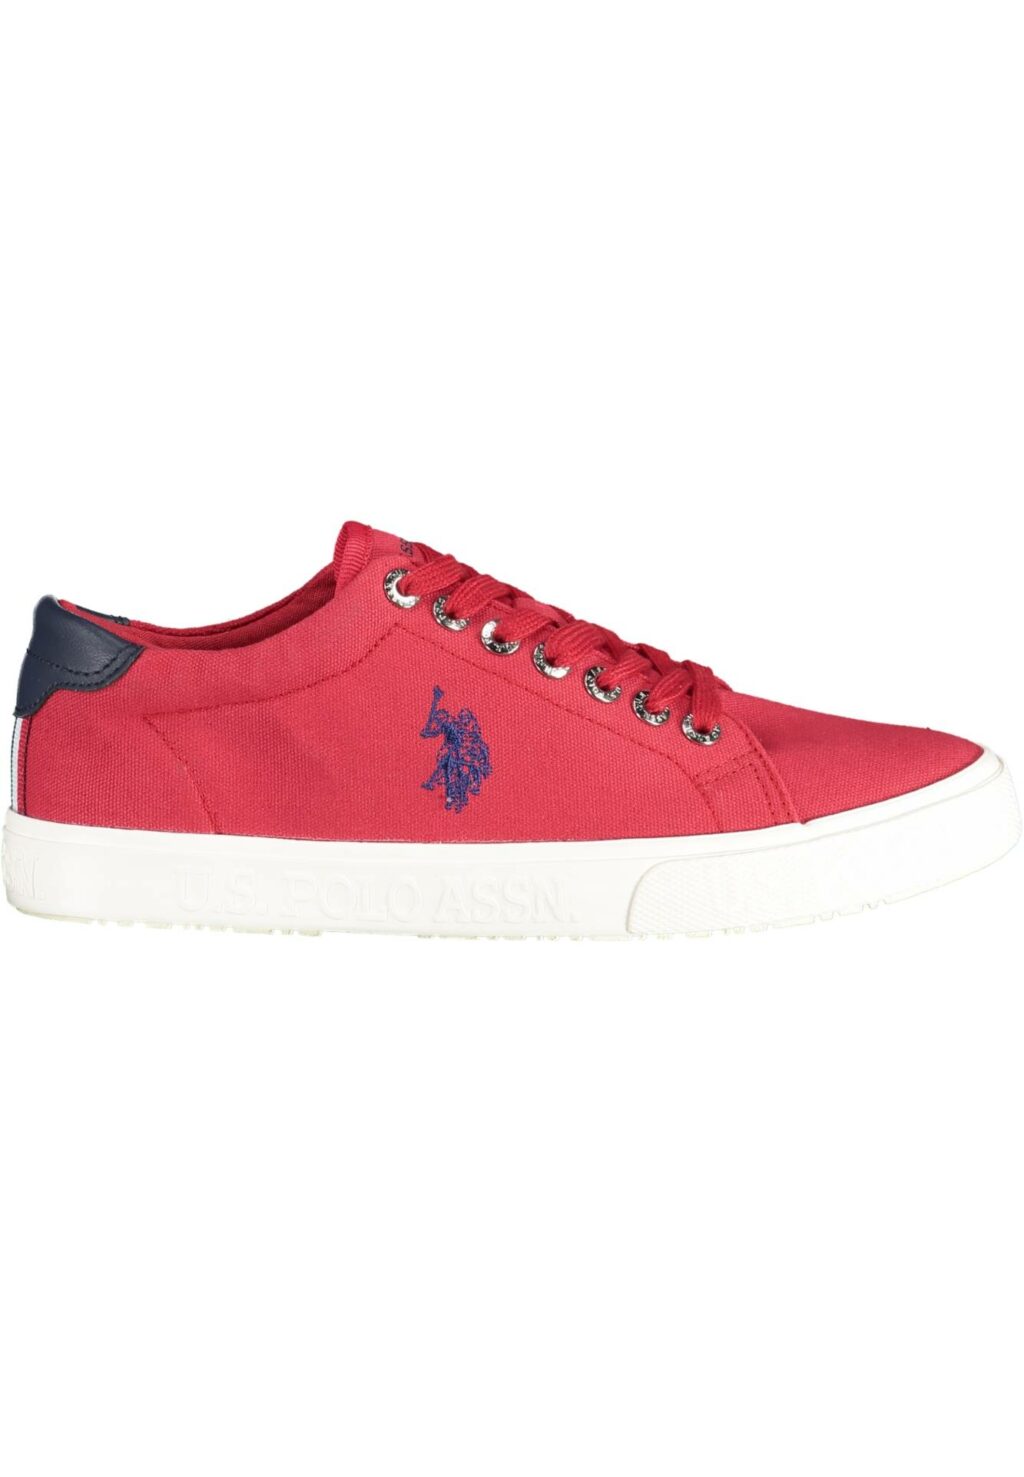 US POLO ASSN. RED MEN'S SPORTS SHOES MARCS003M2C1_ROSSO_RED001